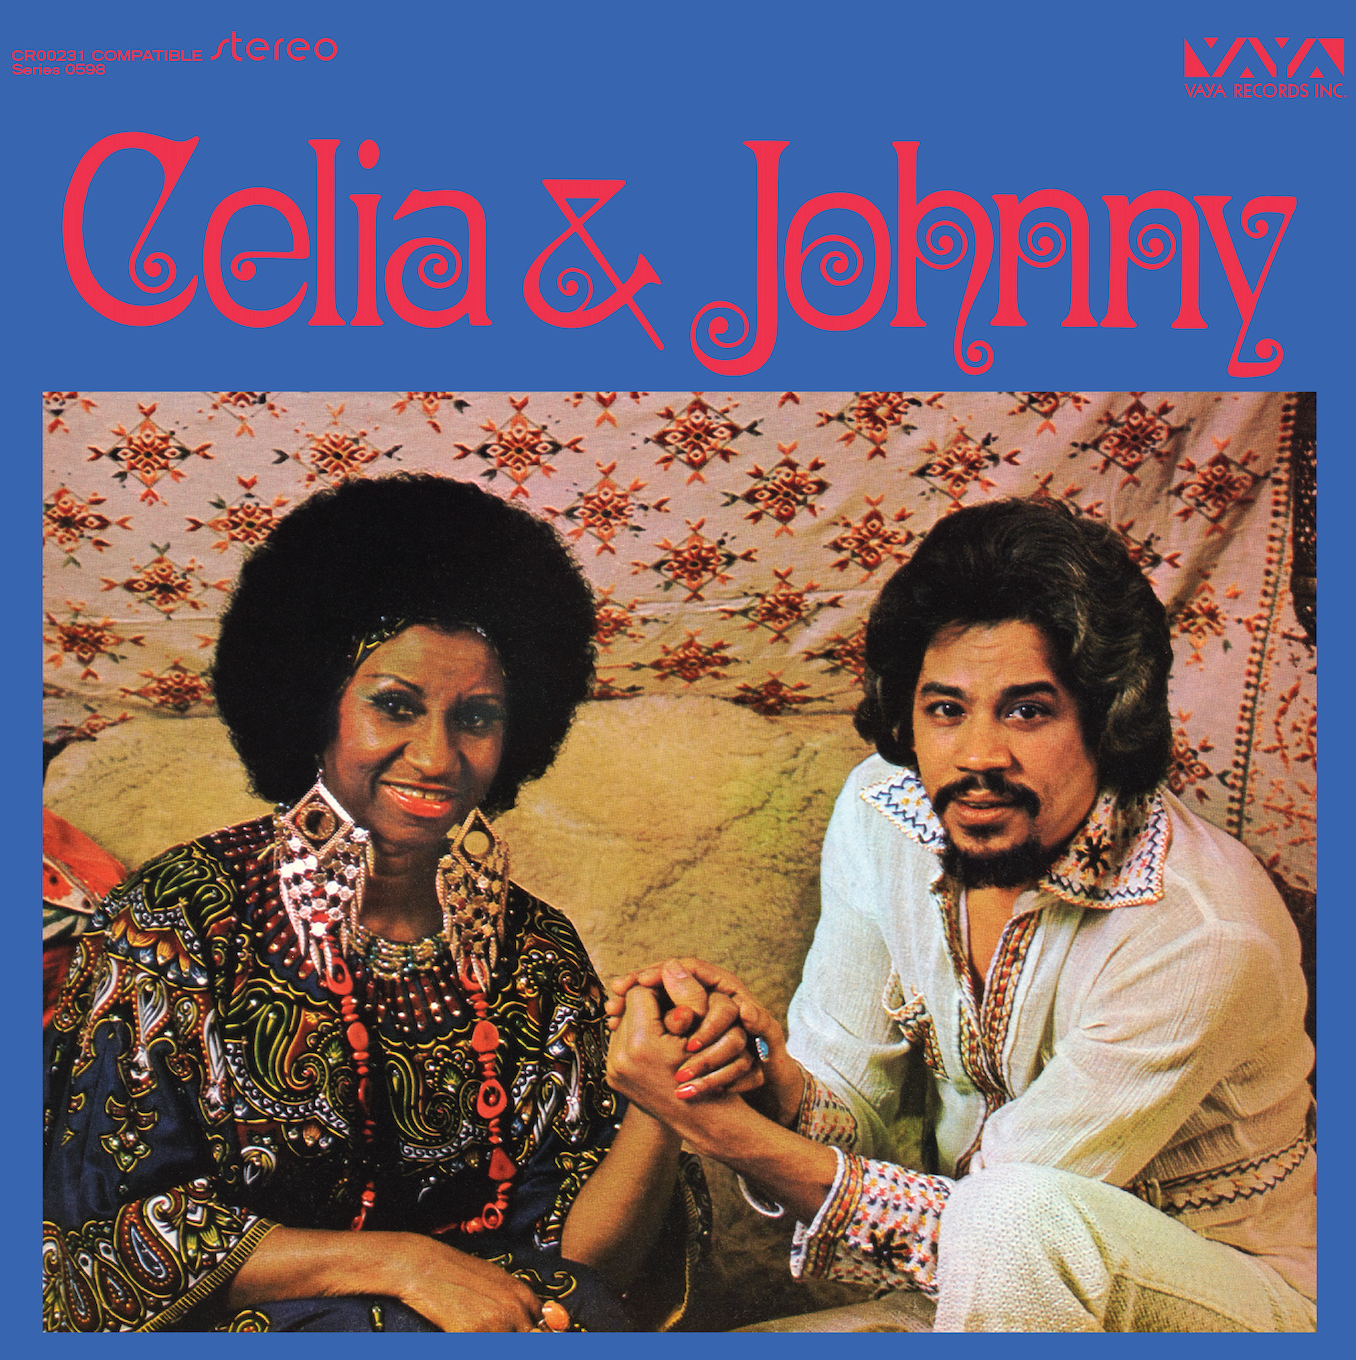 CELEBRATING 50 YEARS OF CELIA & JOHNNY WITH A SPECIAL ANNIVERSARY VINYL REISSUE